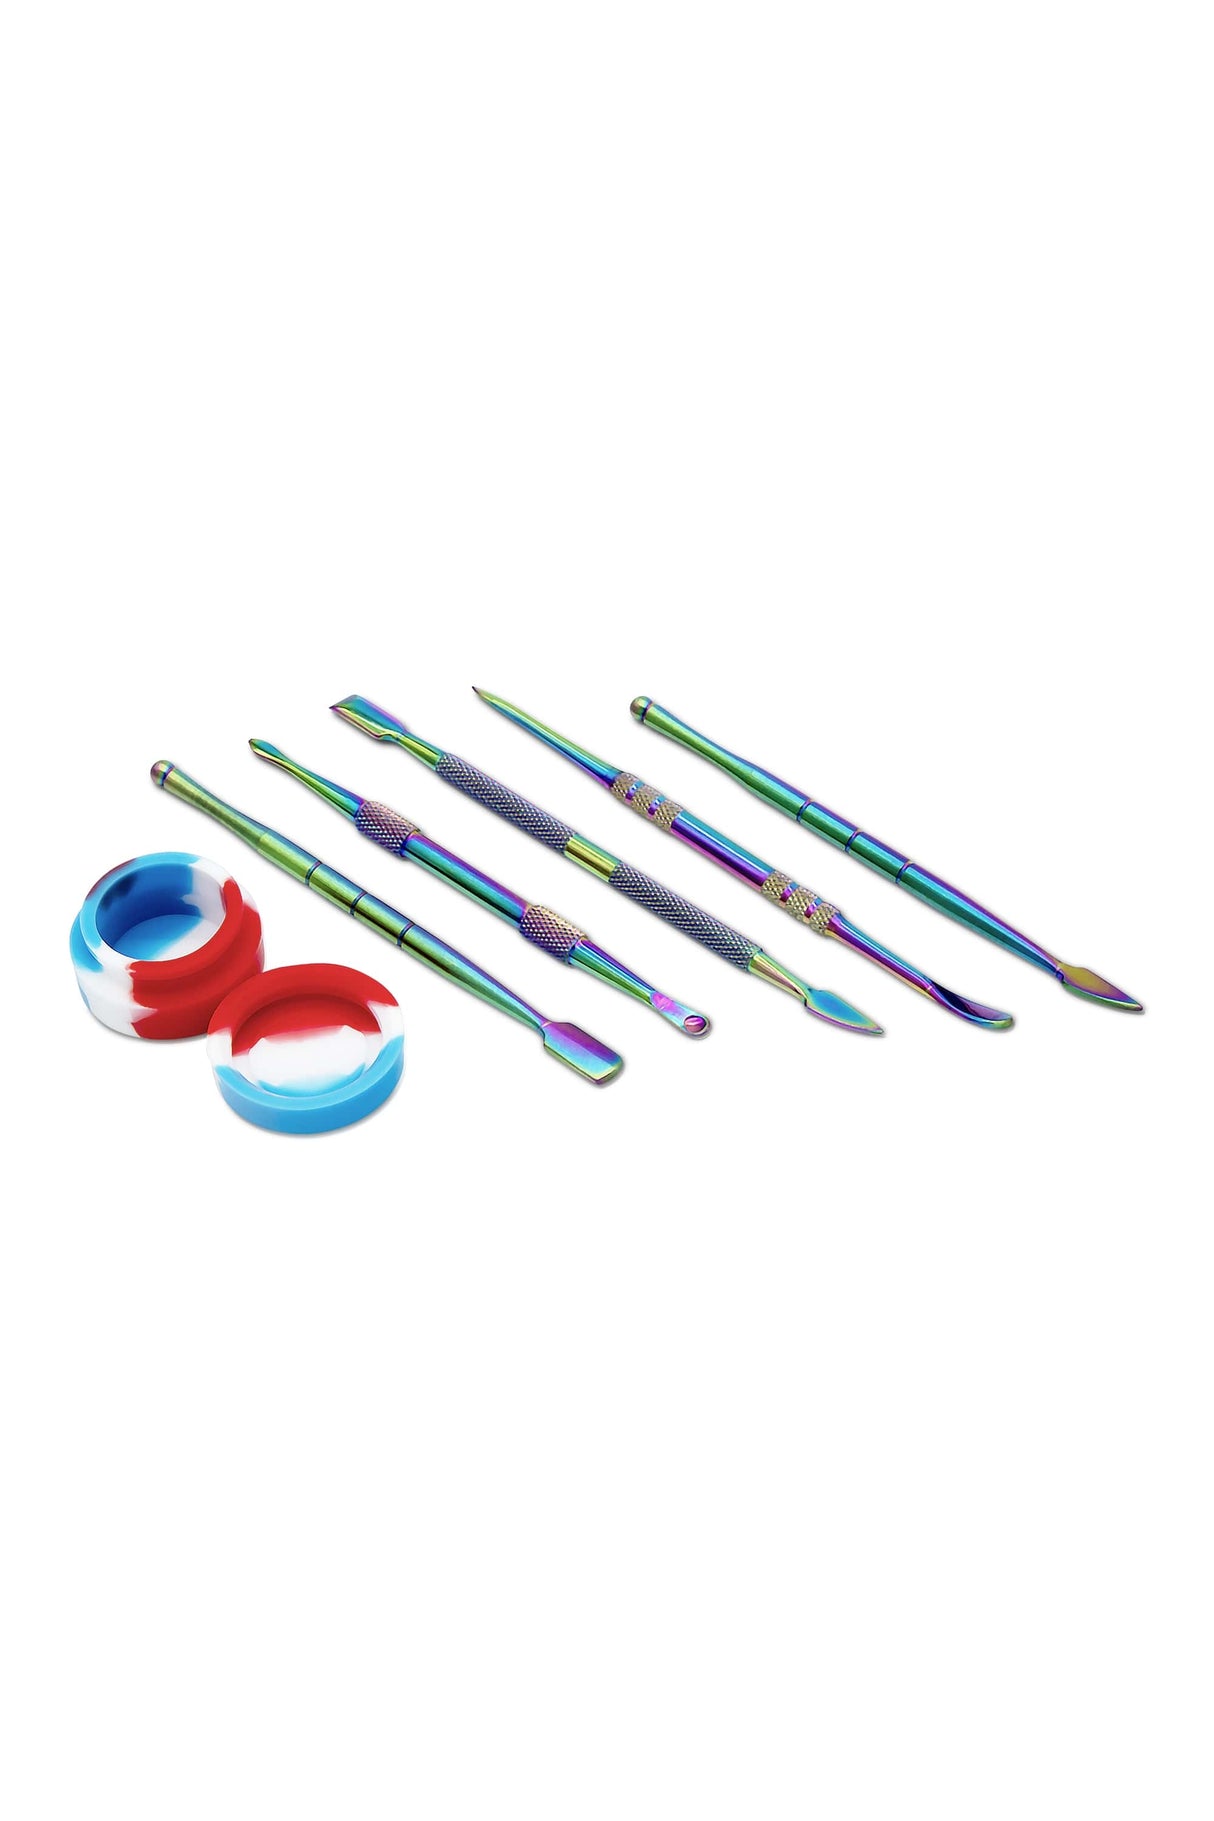 Rupert's Drop Iridescent Titanium Dabber Set with Silicone Dish and Case